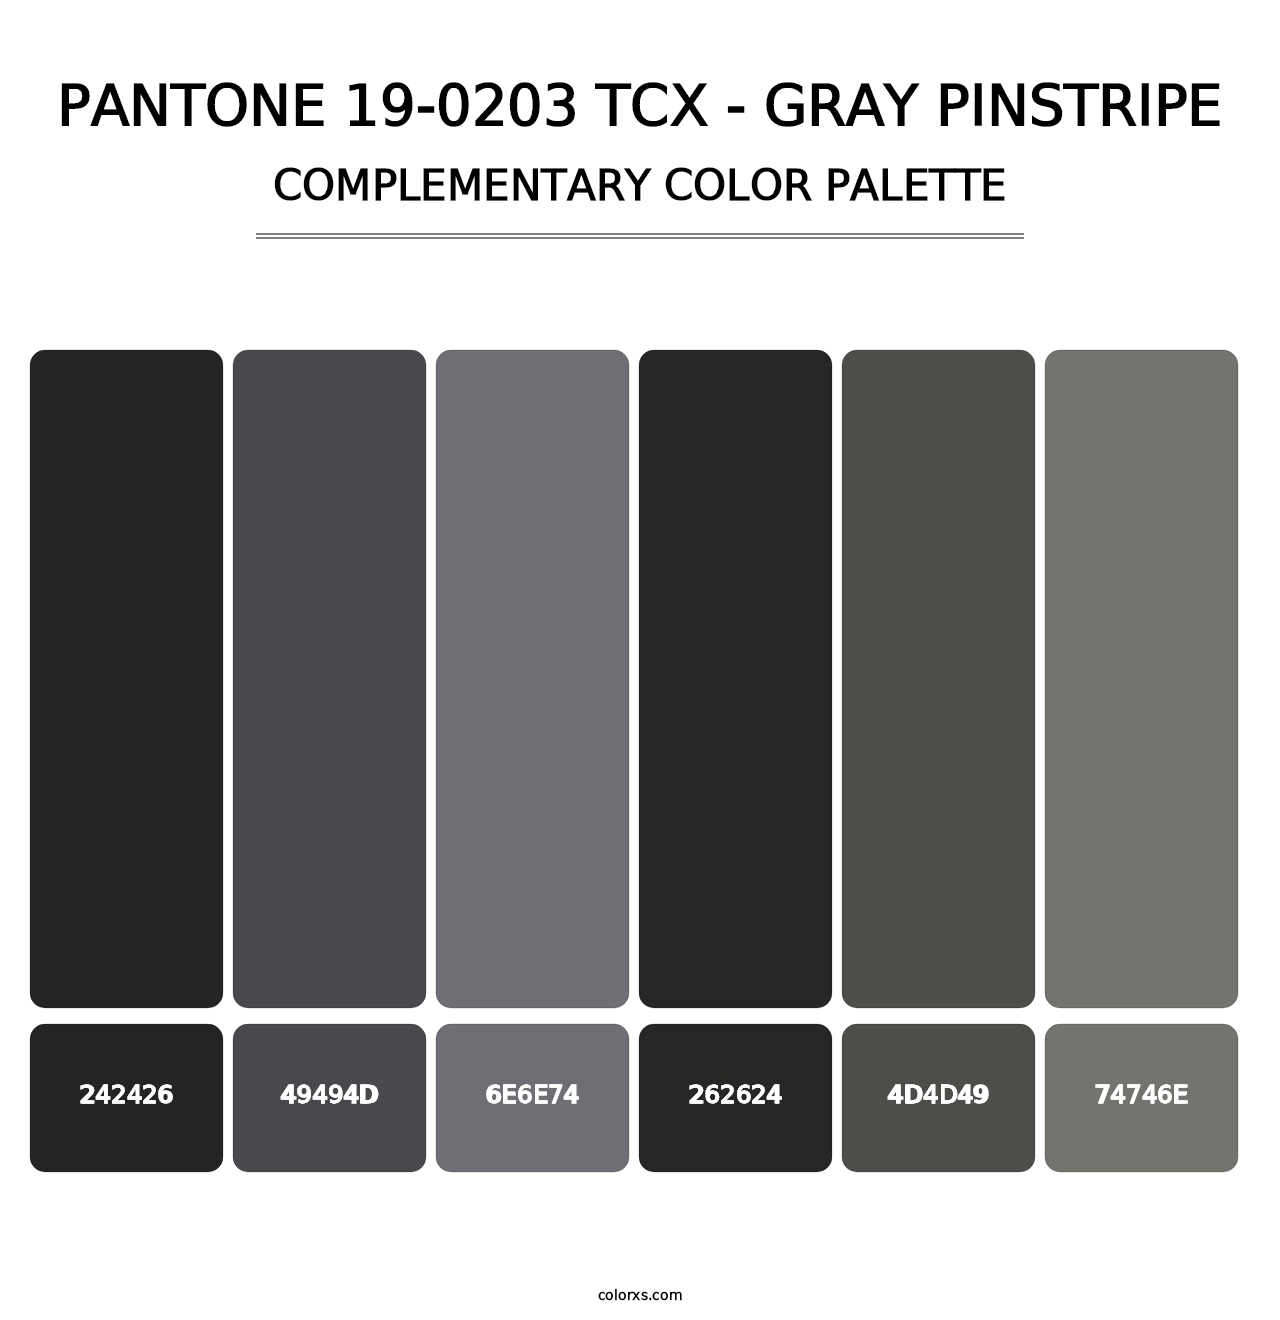 PANTONE 19-0203 TCX - Gray Pinstripe - Complementary Color Palette